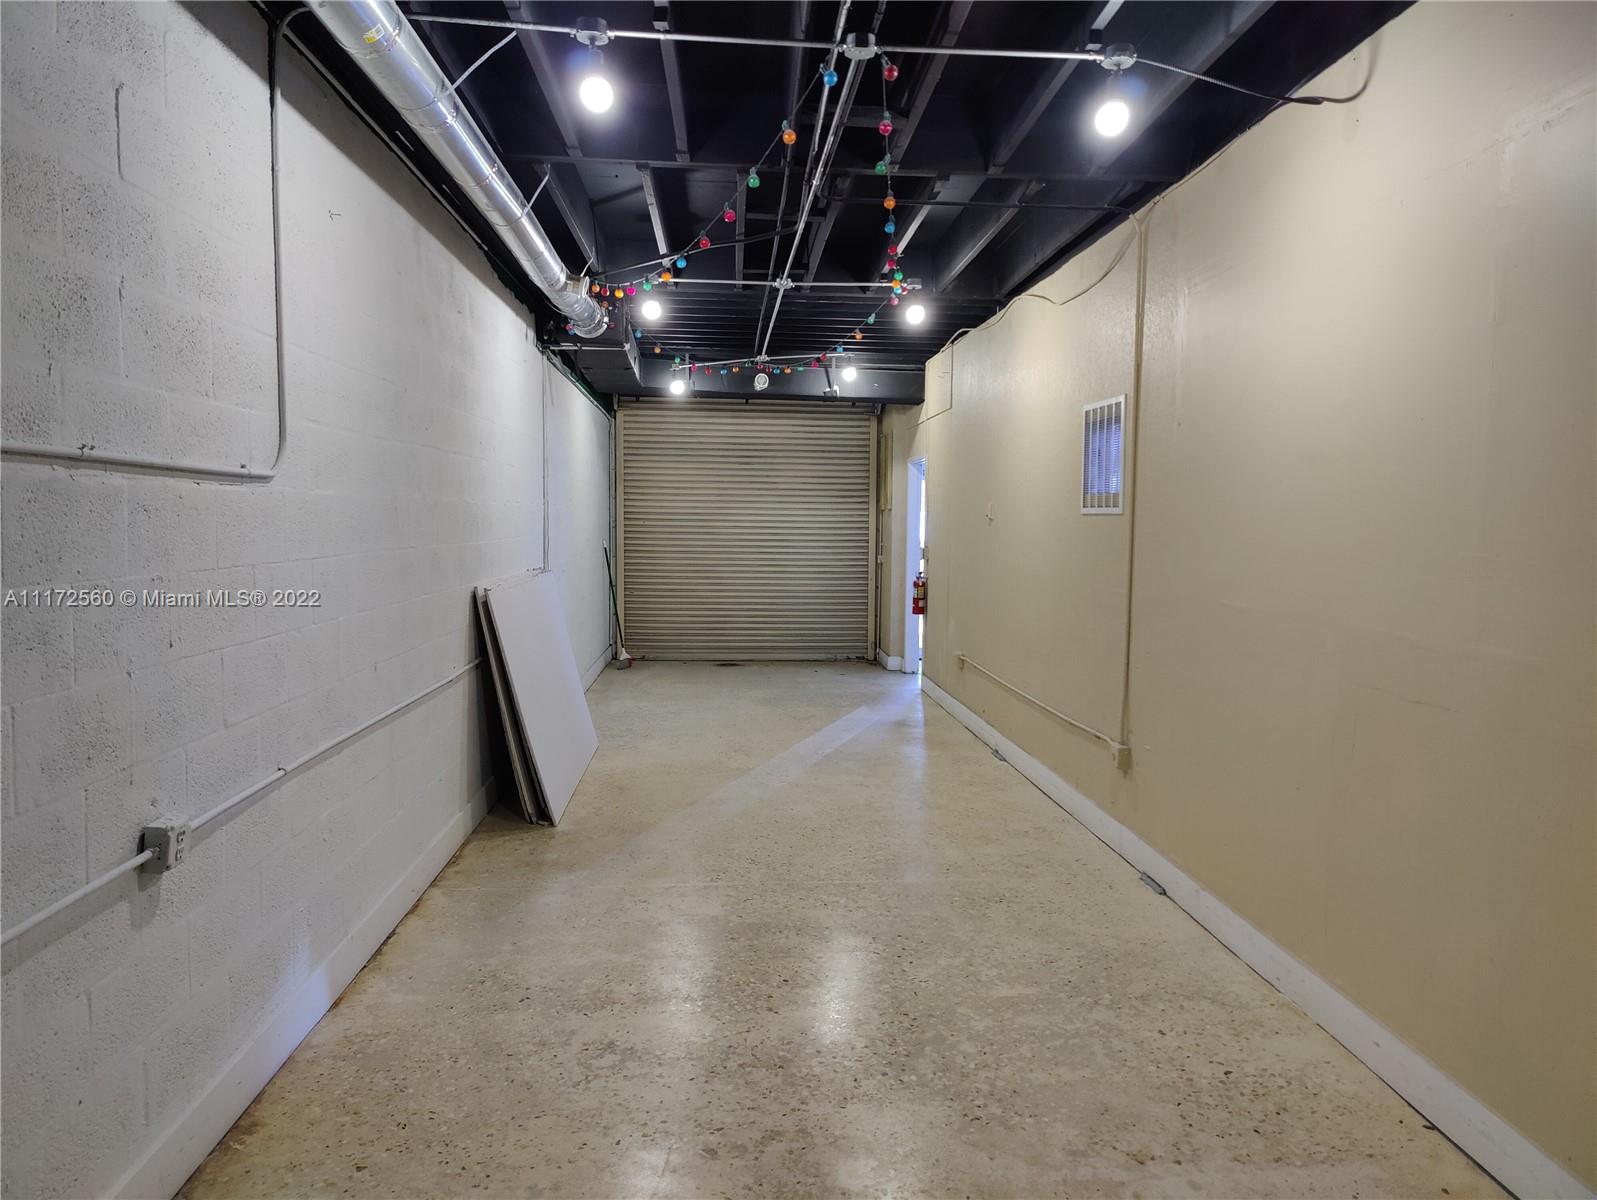 Warehouse corner unit. 6 offices, 2 bathrooms, reception. dinning area, plus Warehouse area with A/C. 2 Stories with 1 bath on each floor. 1 assigned parking space plus guest parking available.